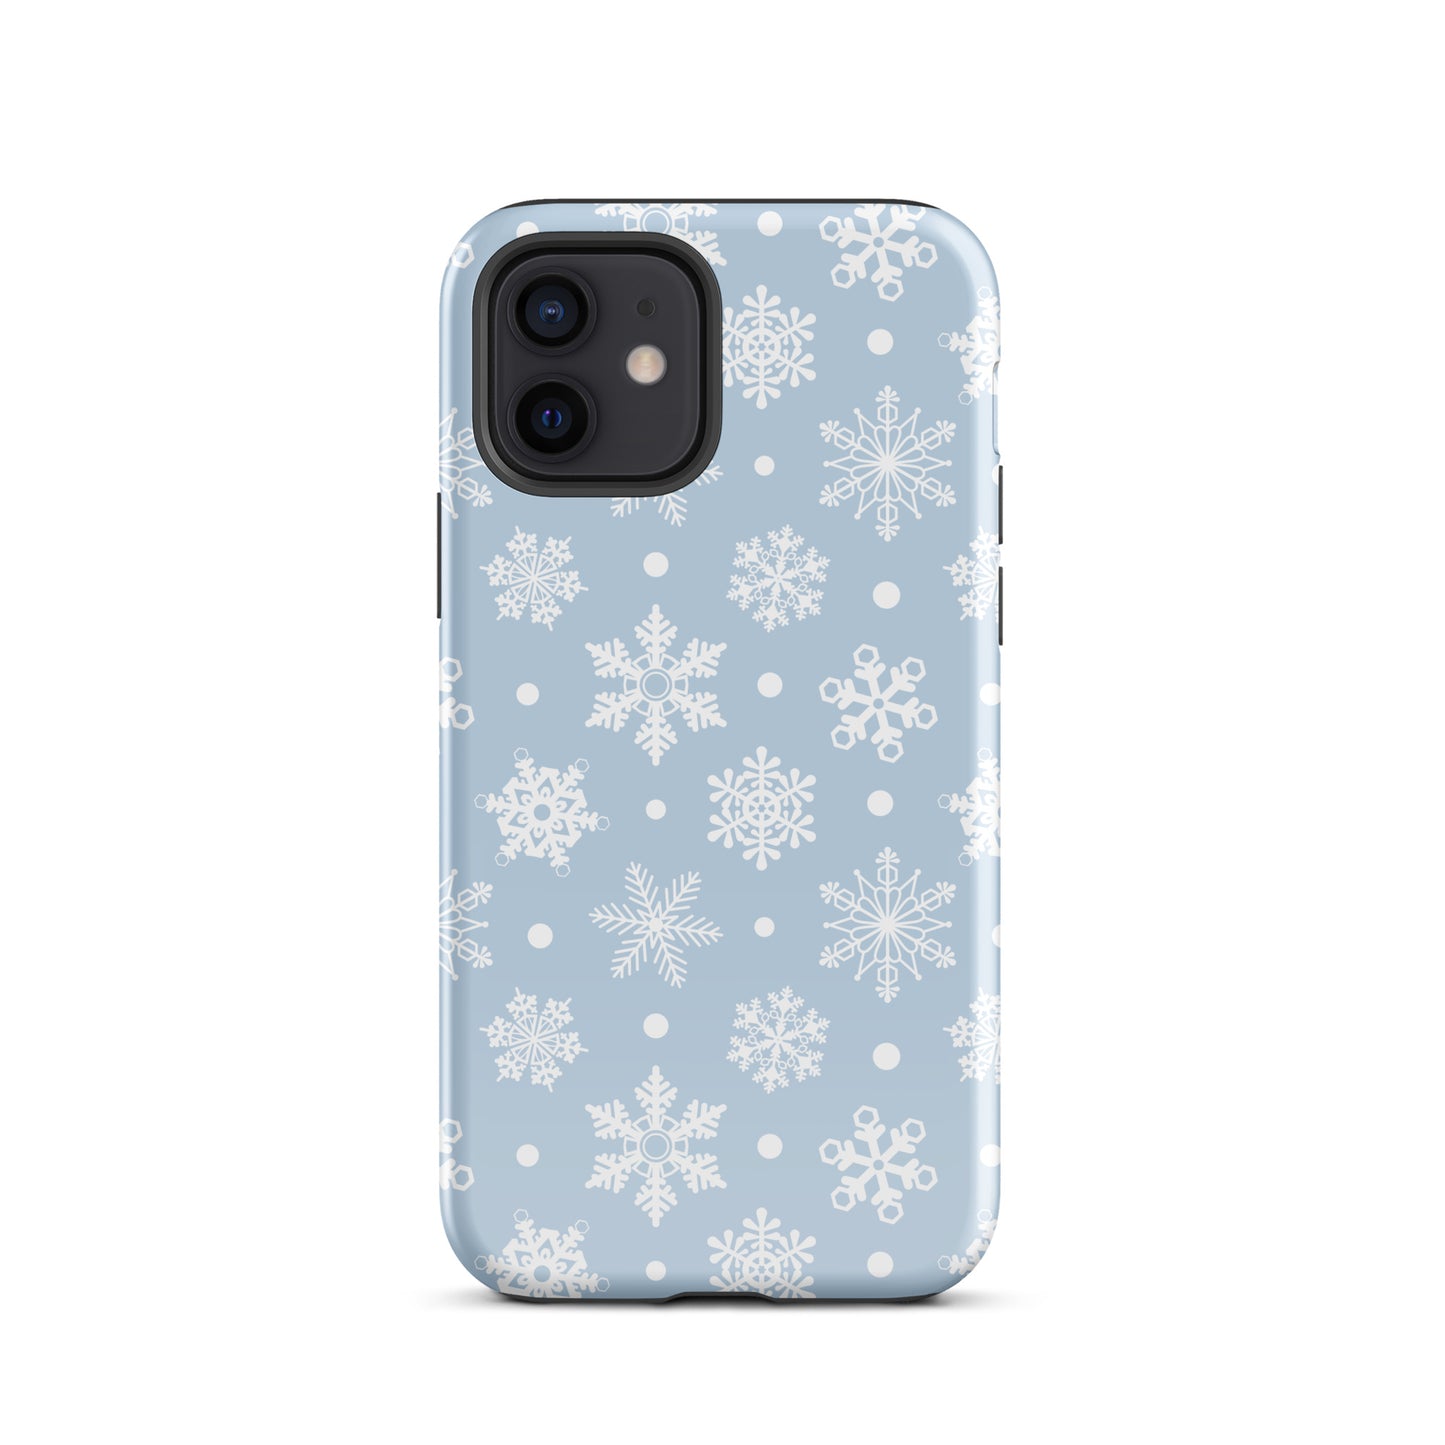 Snowflakes iPhone Case iPhone 12 Glossy